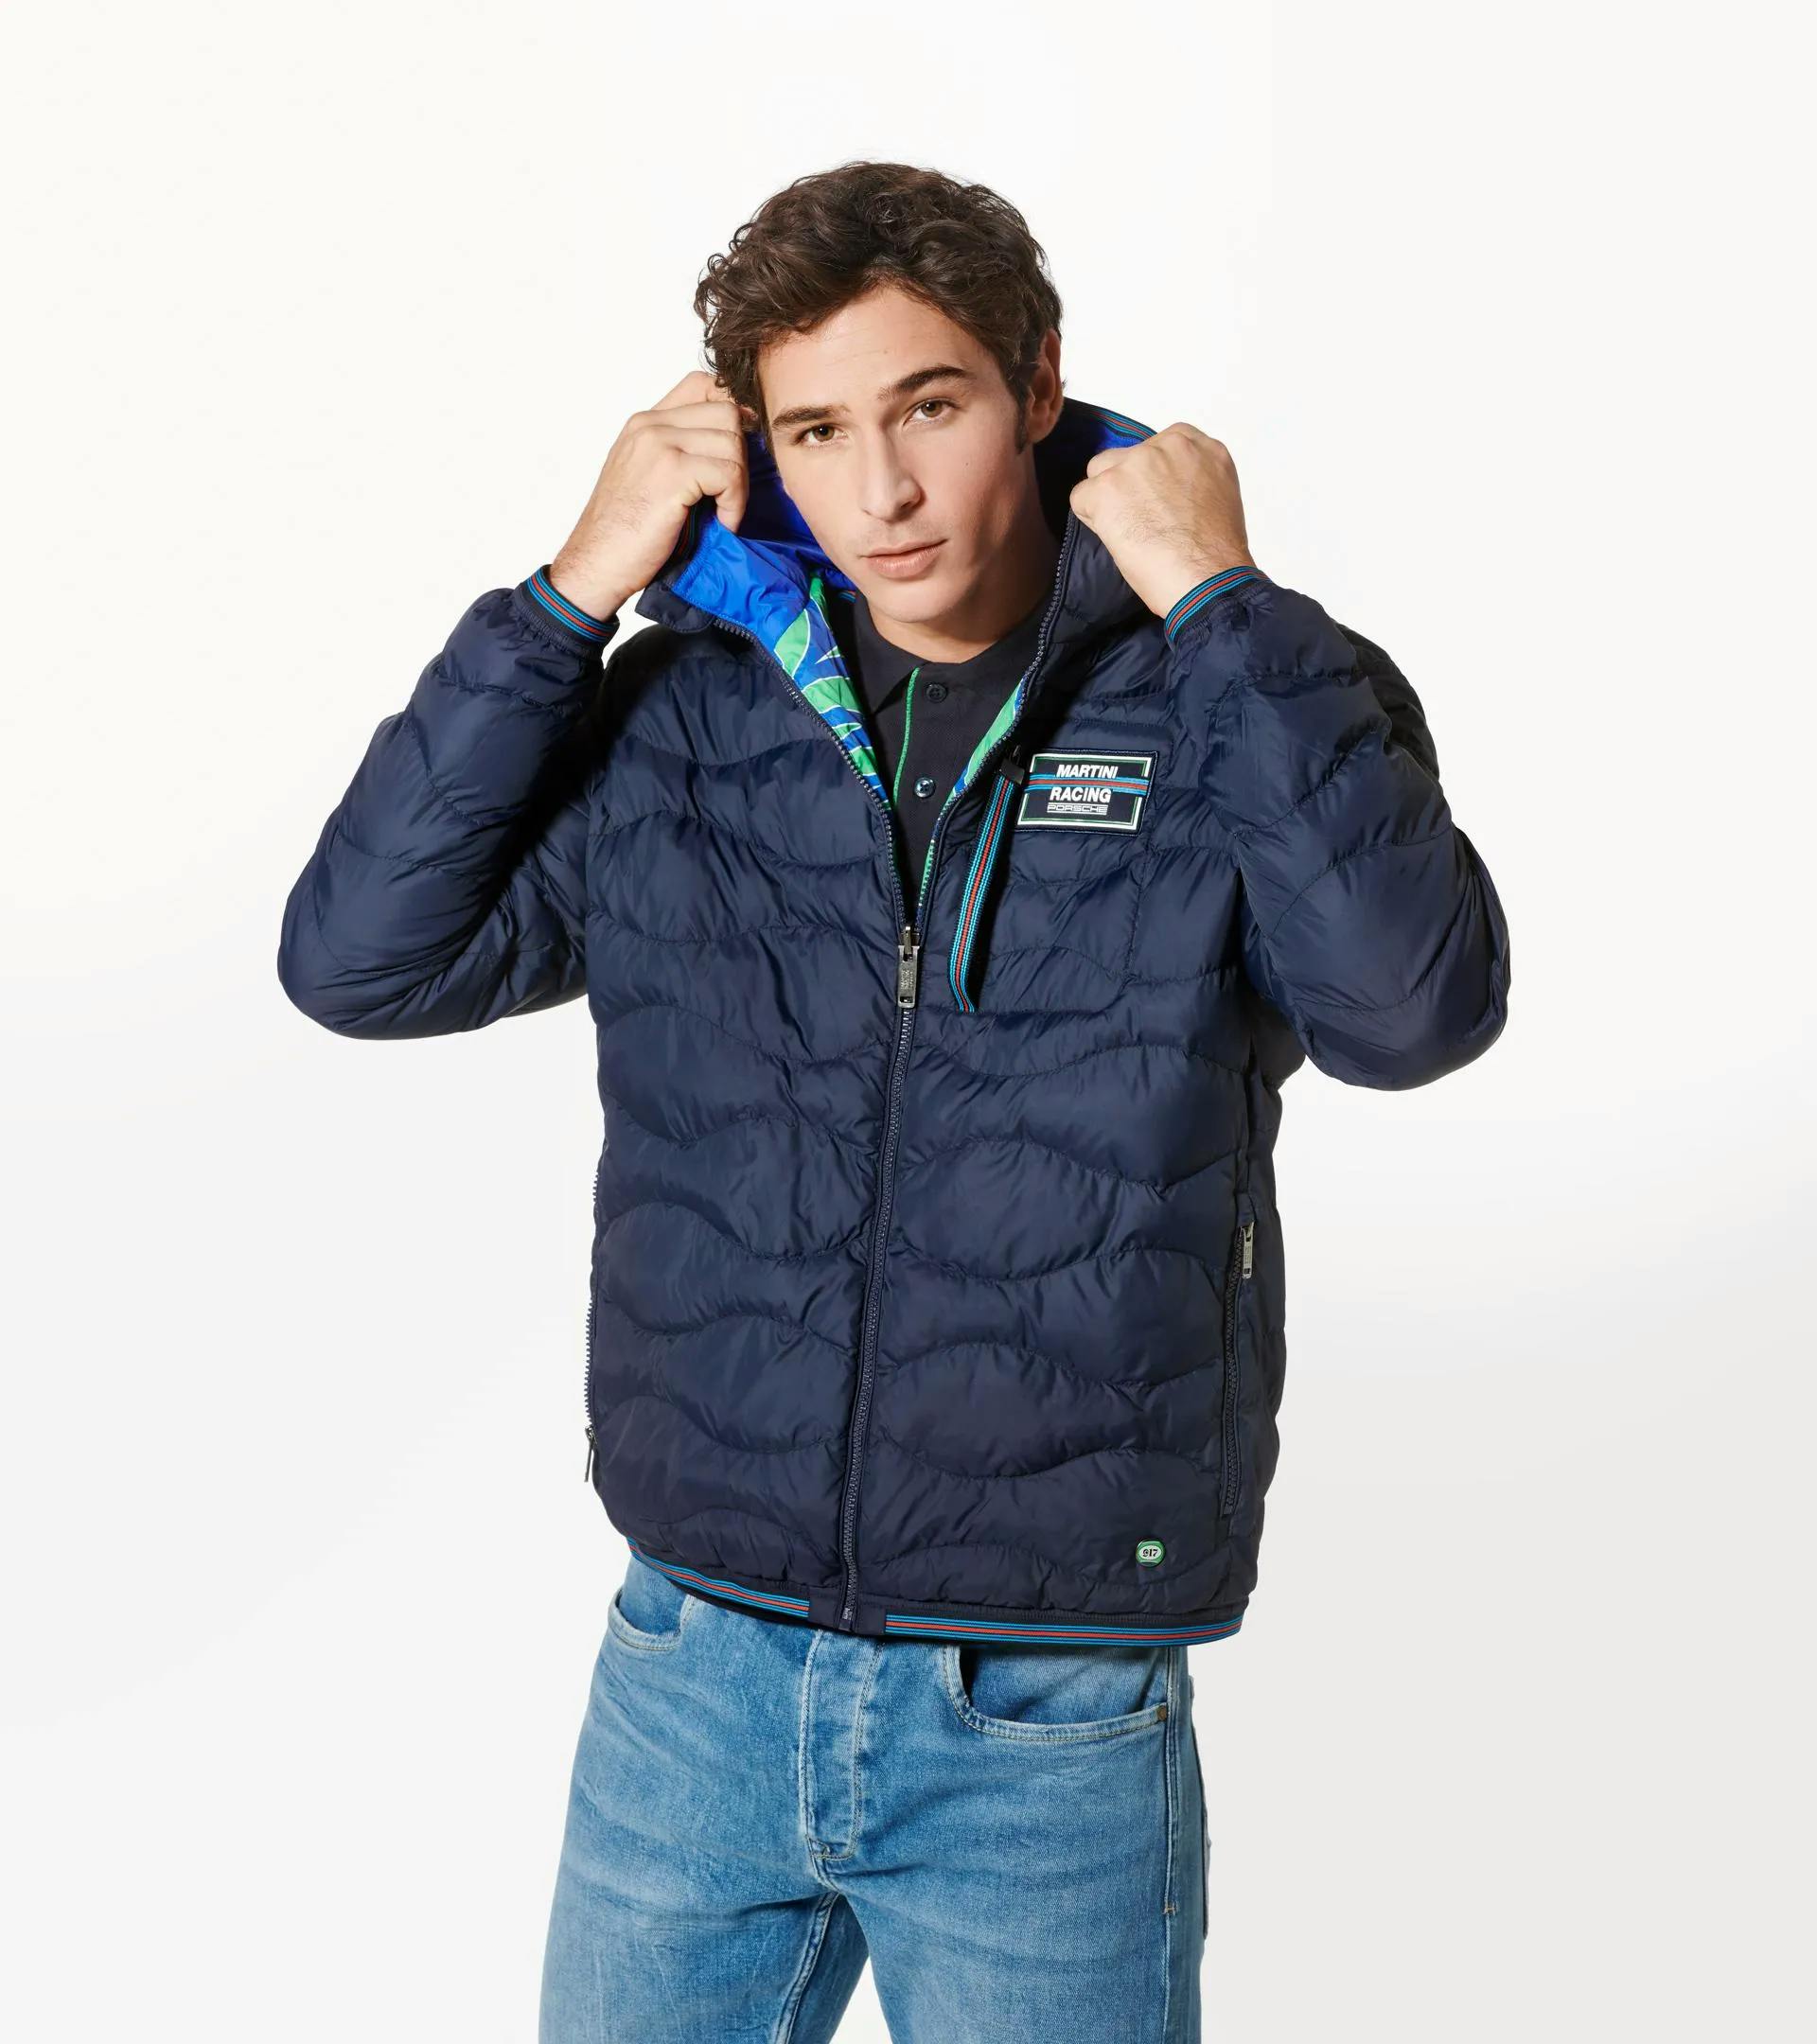 Reversible quilted jacket – MARTINI RACING® 7